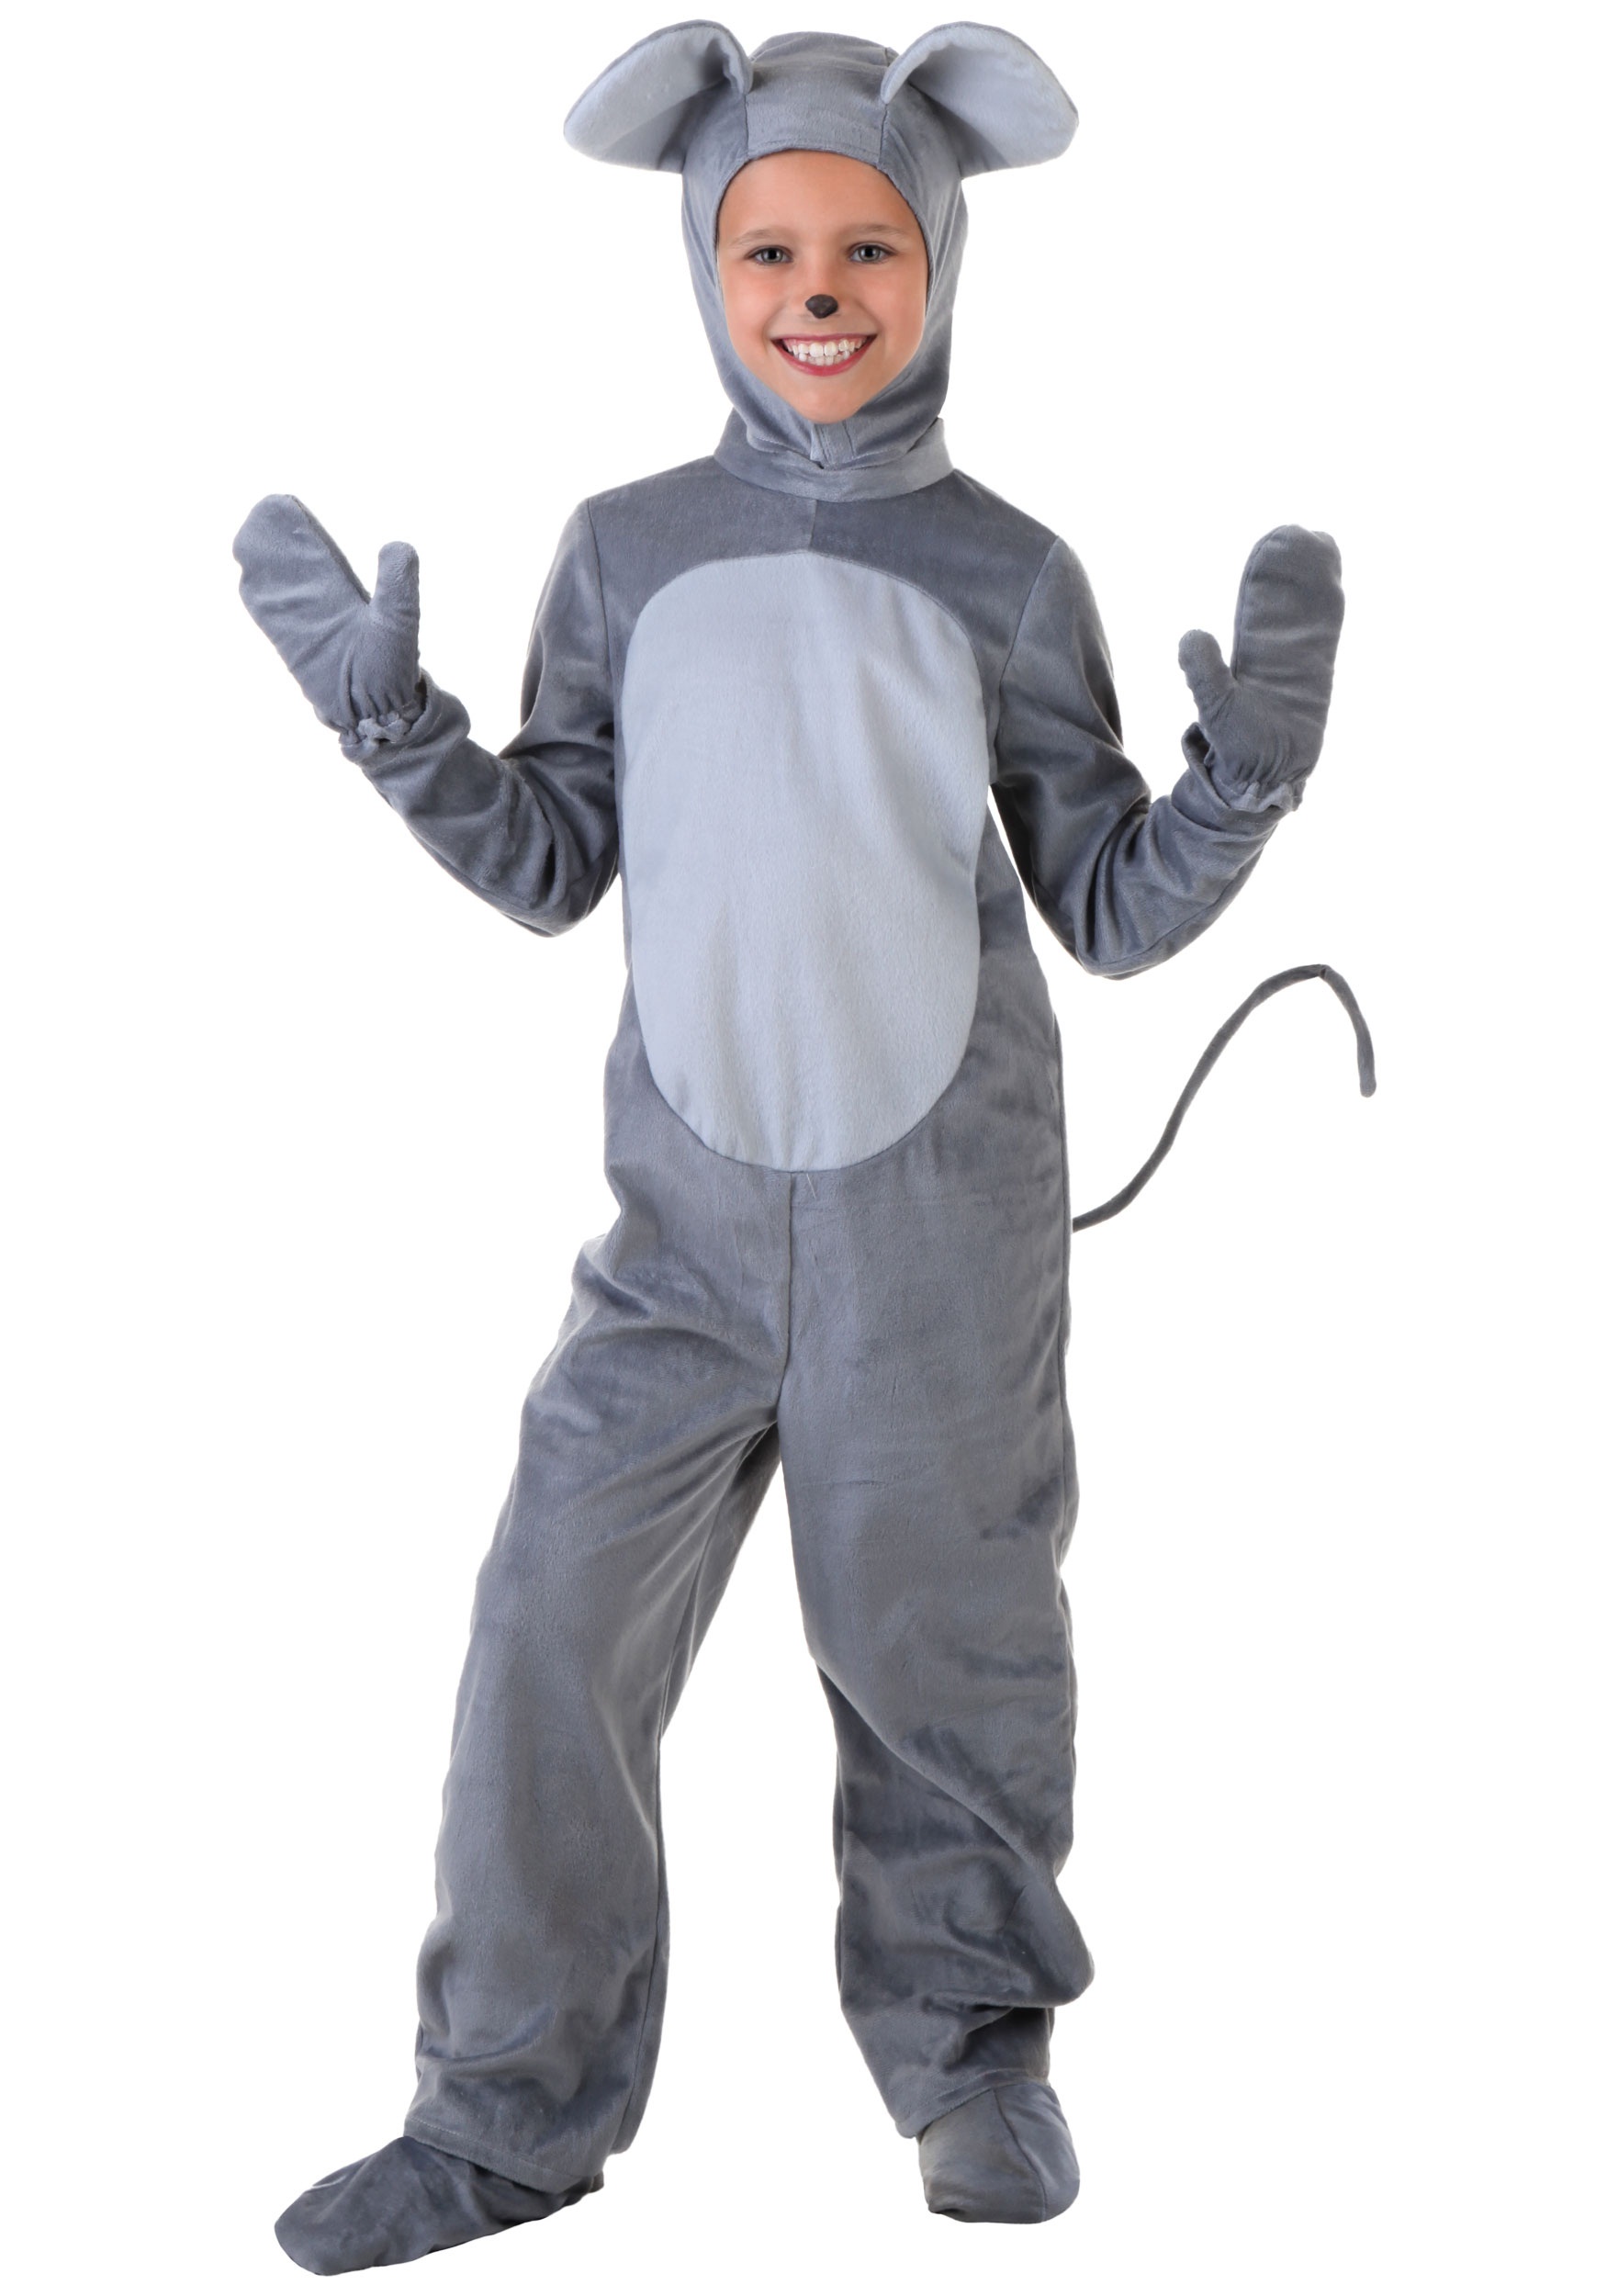 Photos - Fancy Dress FUN Costumes Mouse Costume for Kids Gray FUN1172CH